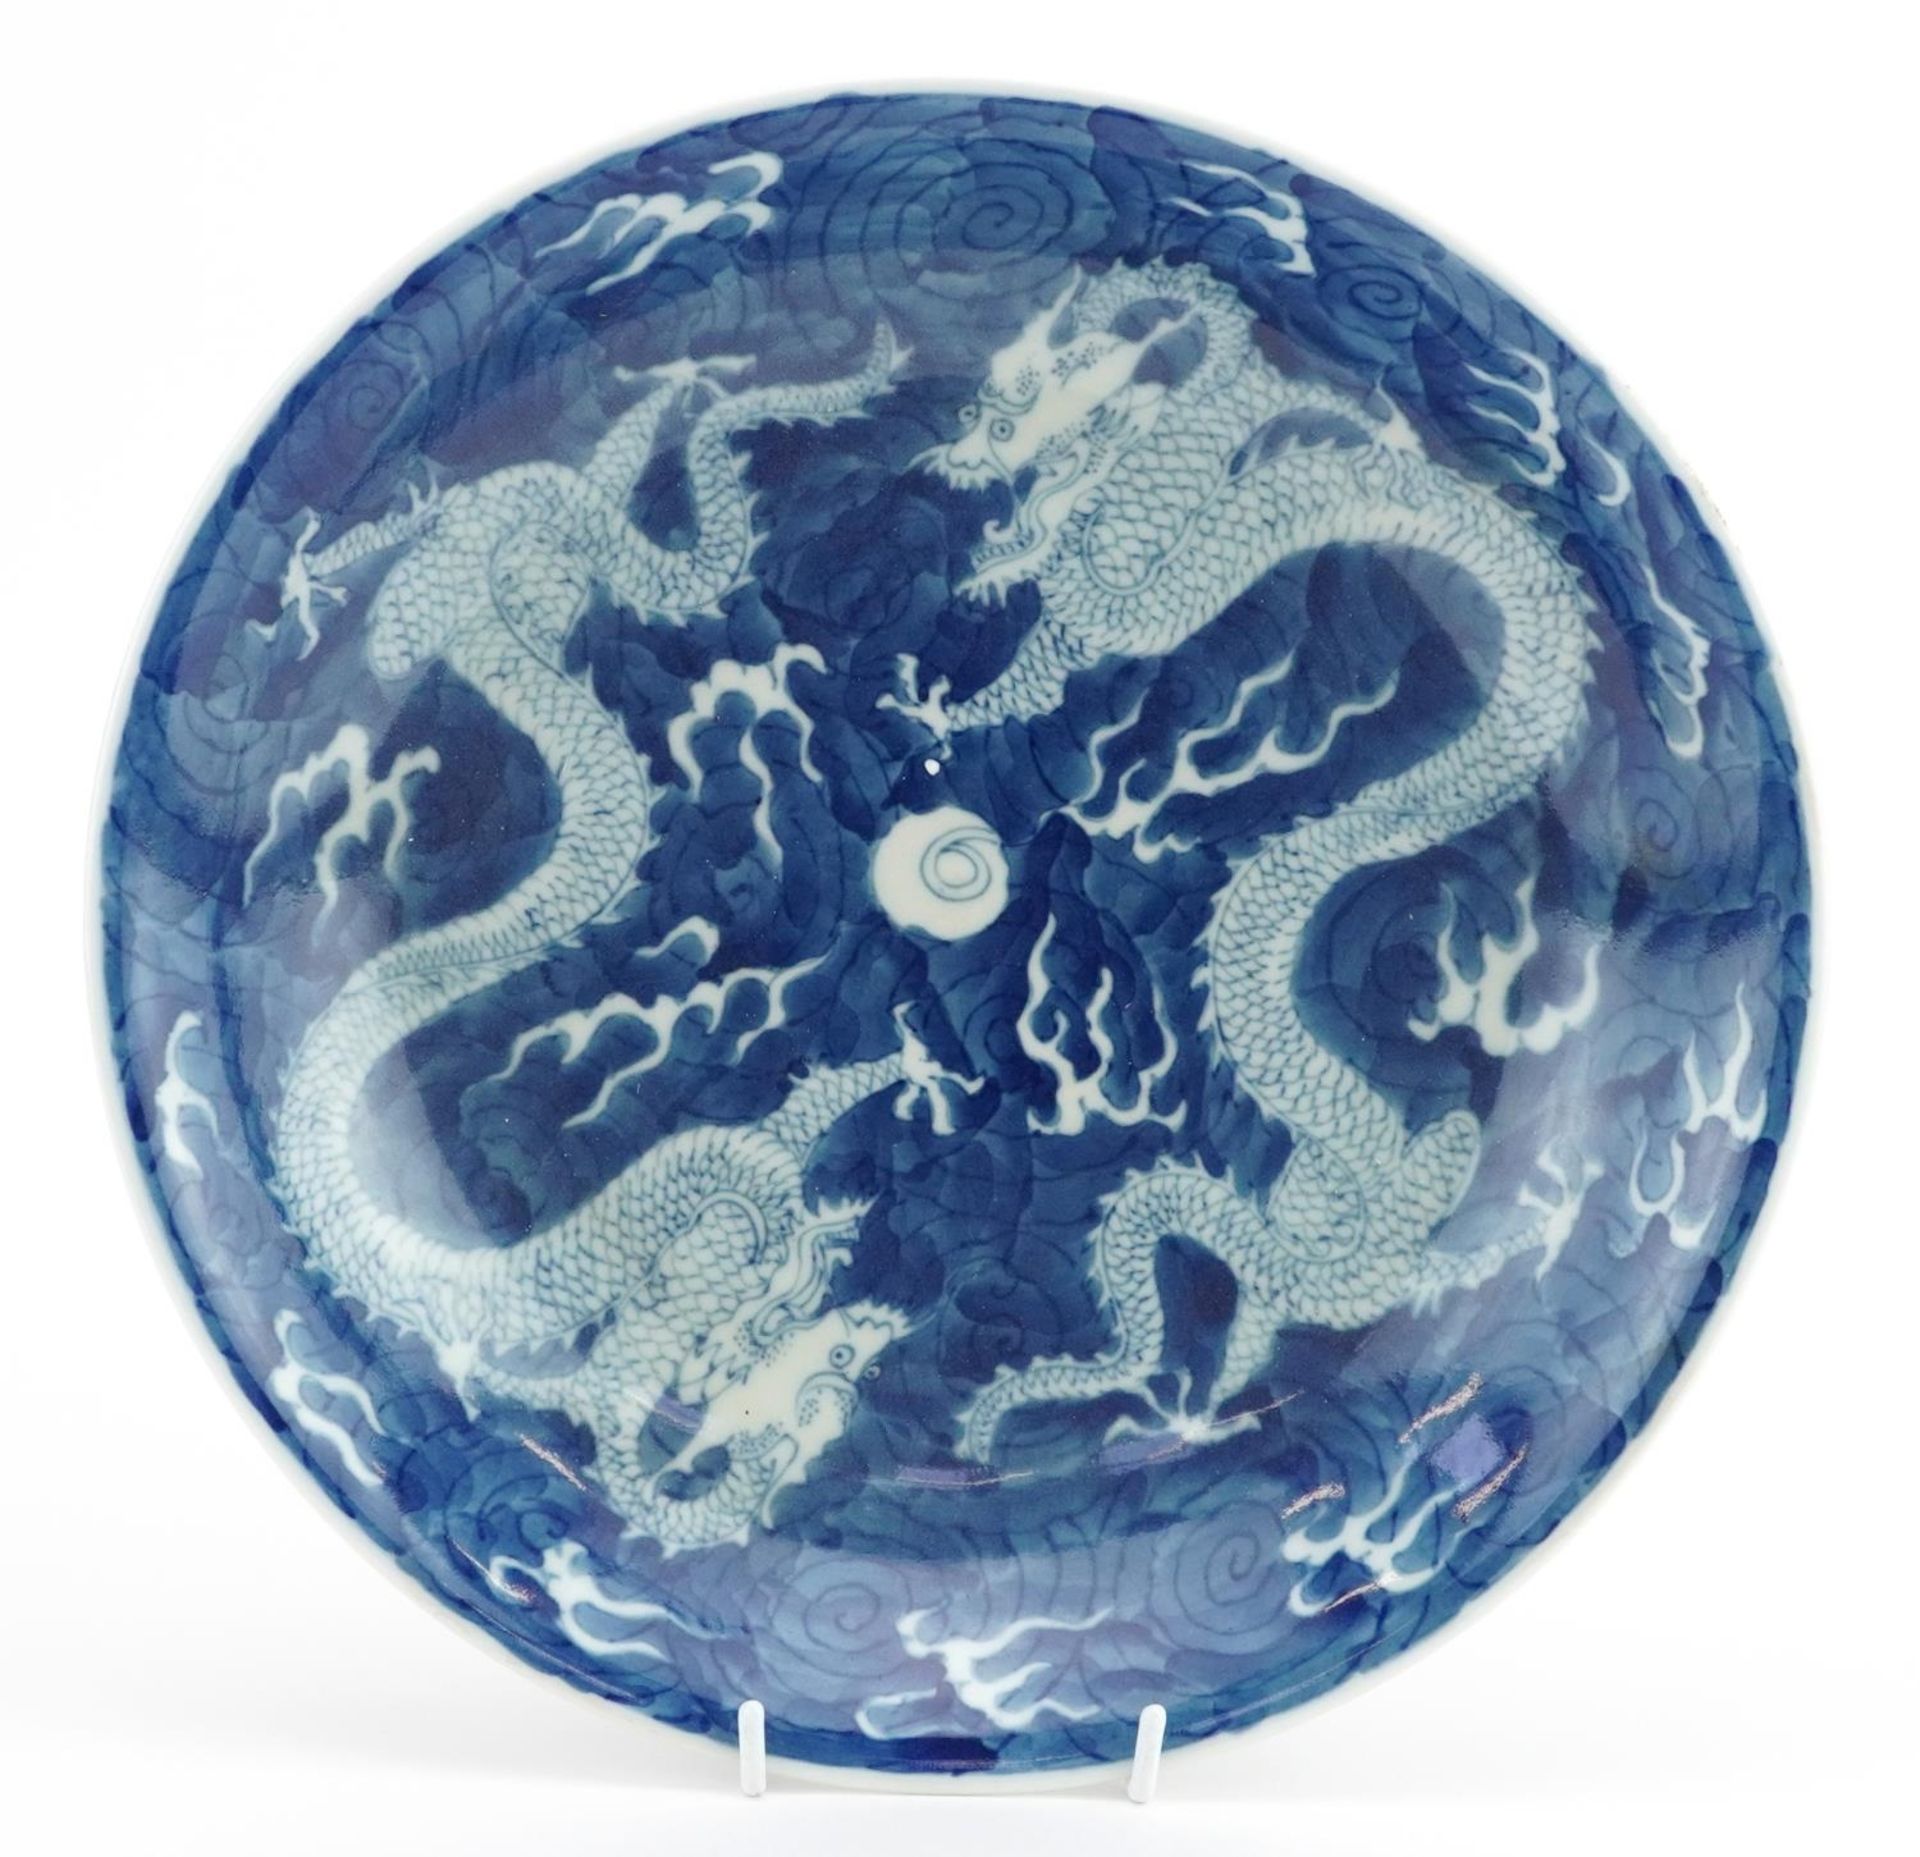 Chinese blue and white porcelain shallow bowl hand painted with dragons chasing the flaming pearl